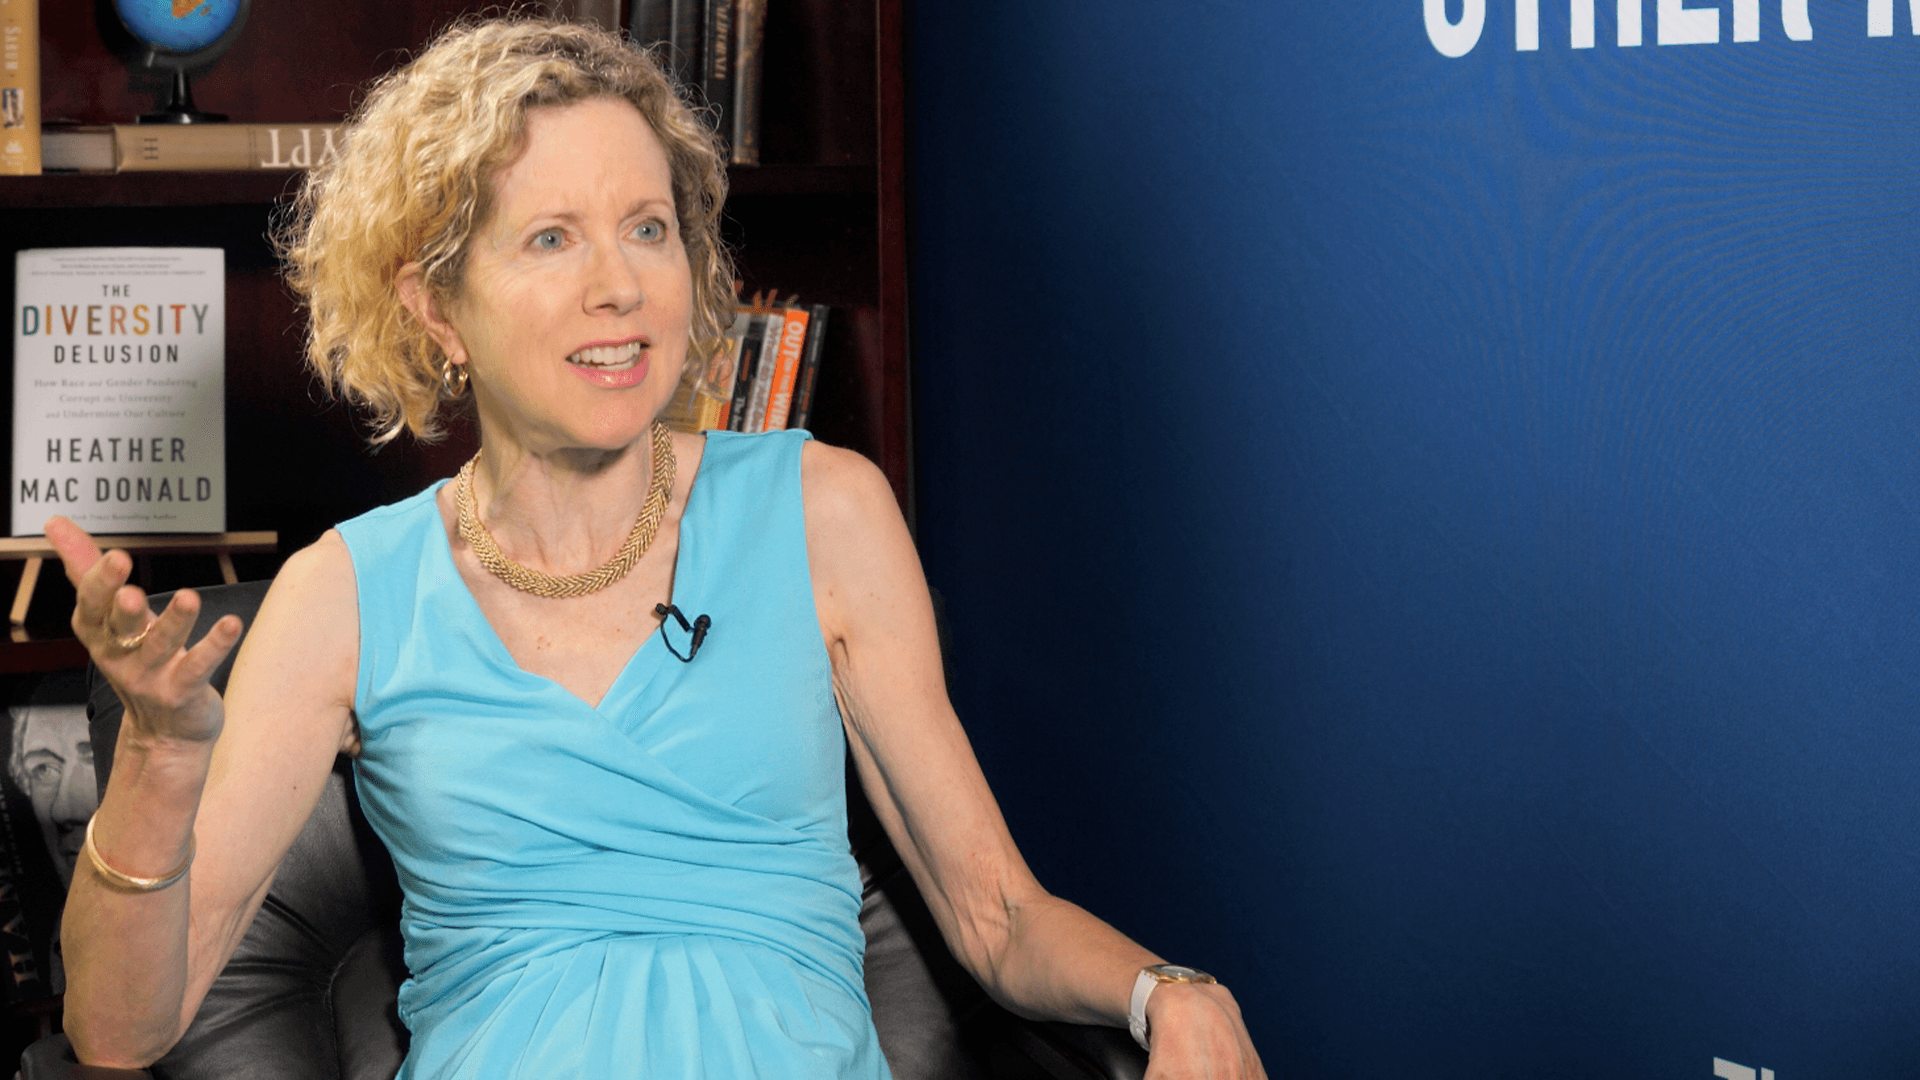 23 Awesome And Interesting Facts About Heather Mac Donald Tons Of Facts